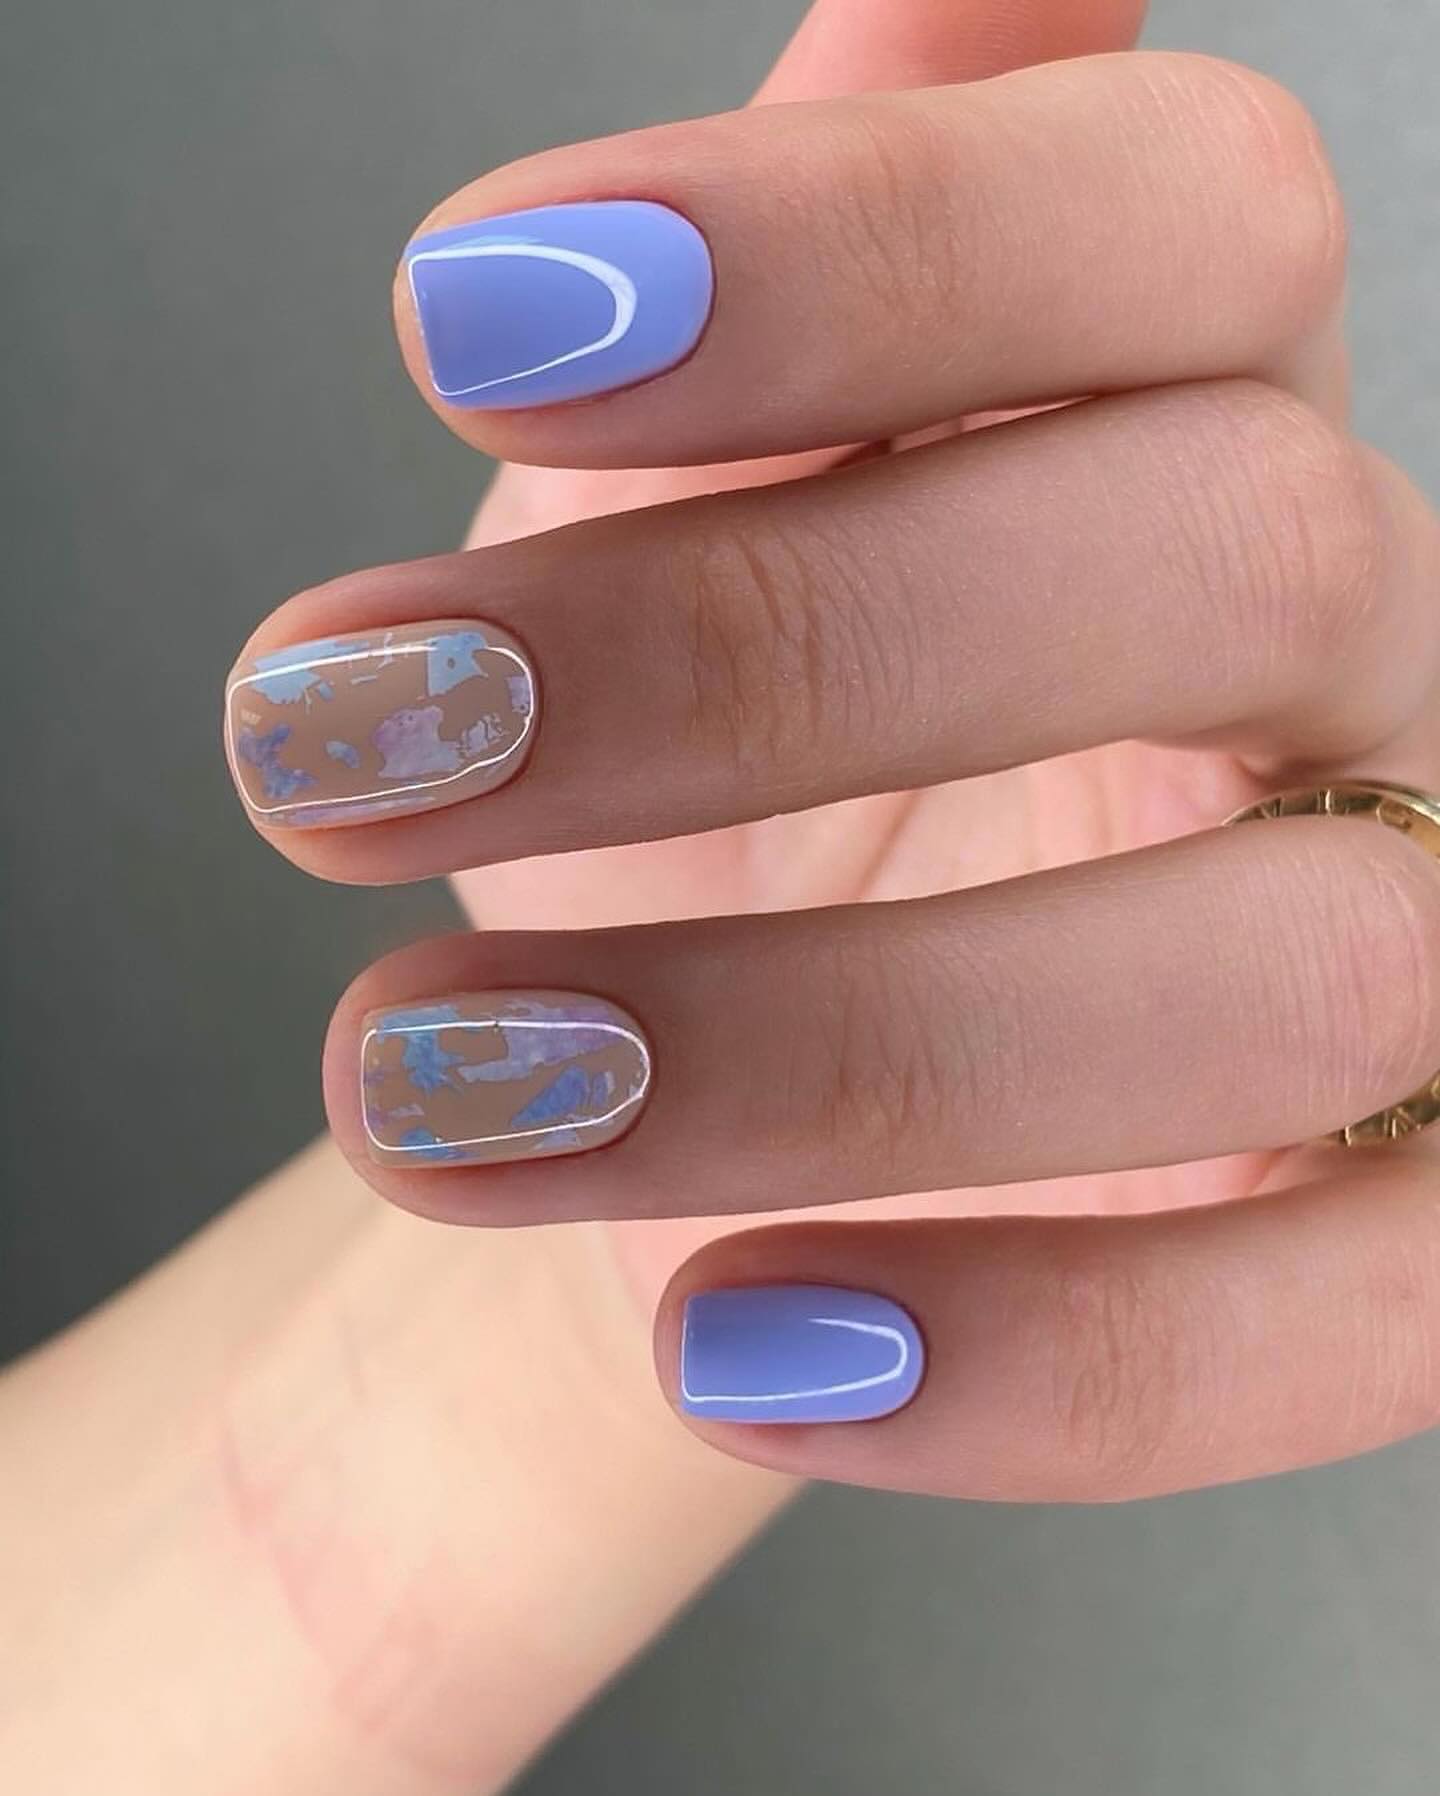 100 Pretty Spring Nail Designs To Try This Year images 81